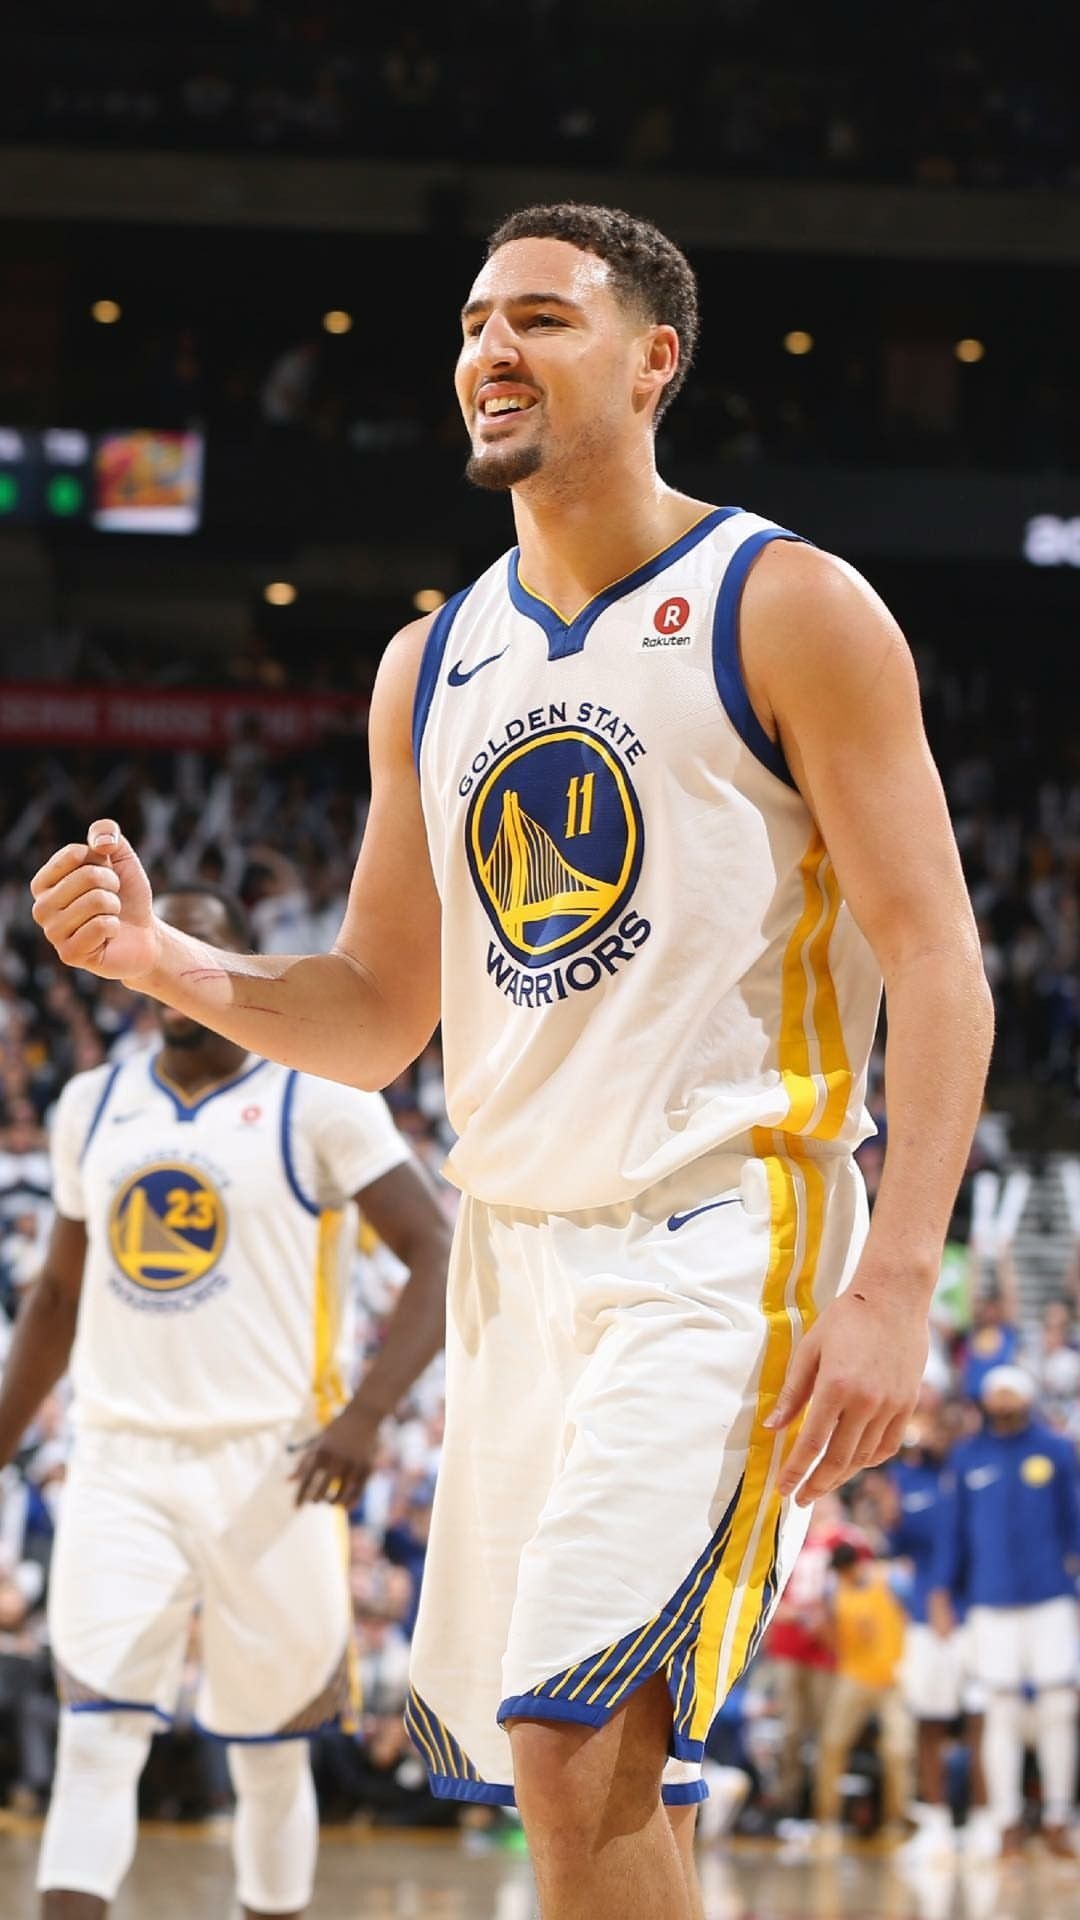 HD wallpaper, Klay Thompson, Nba Pictures, Mobile Full Hd Klay Thompson Wallpaper Photo, Free Download, 1080X1920 Full Hd Phone, Golden State Basketball